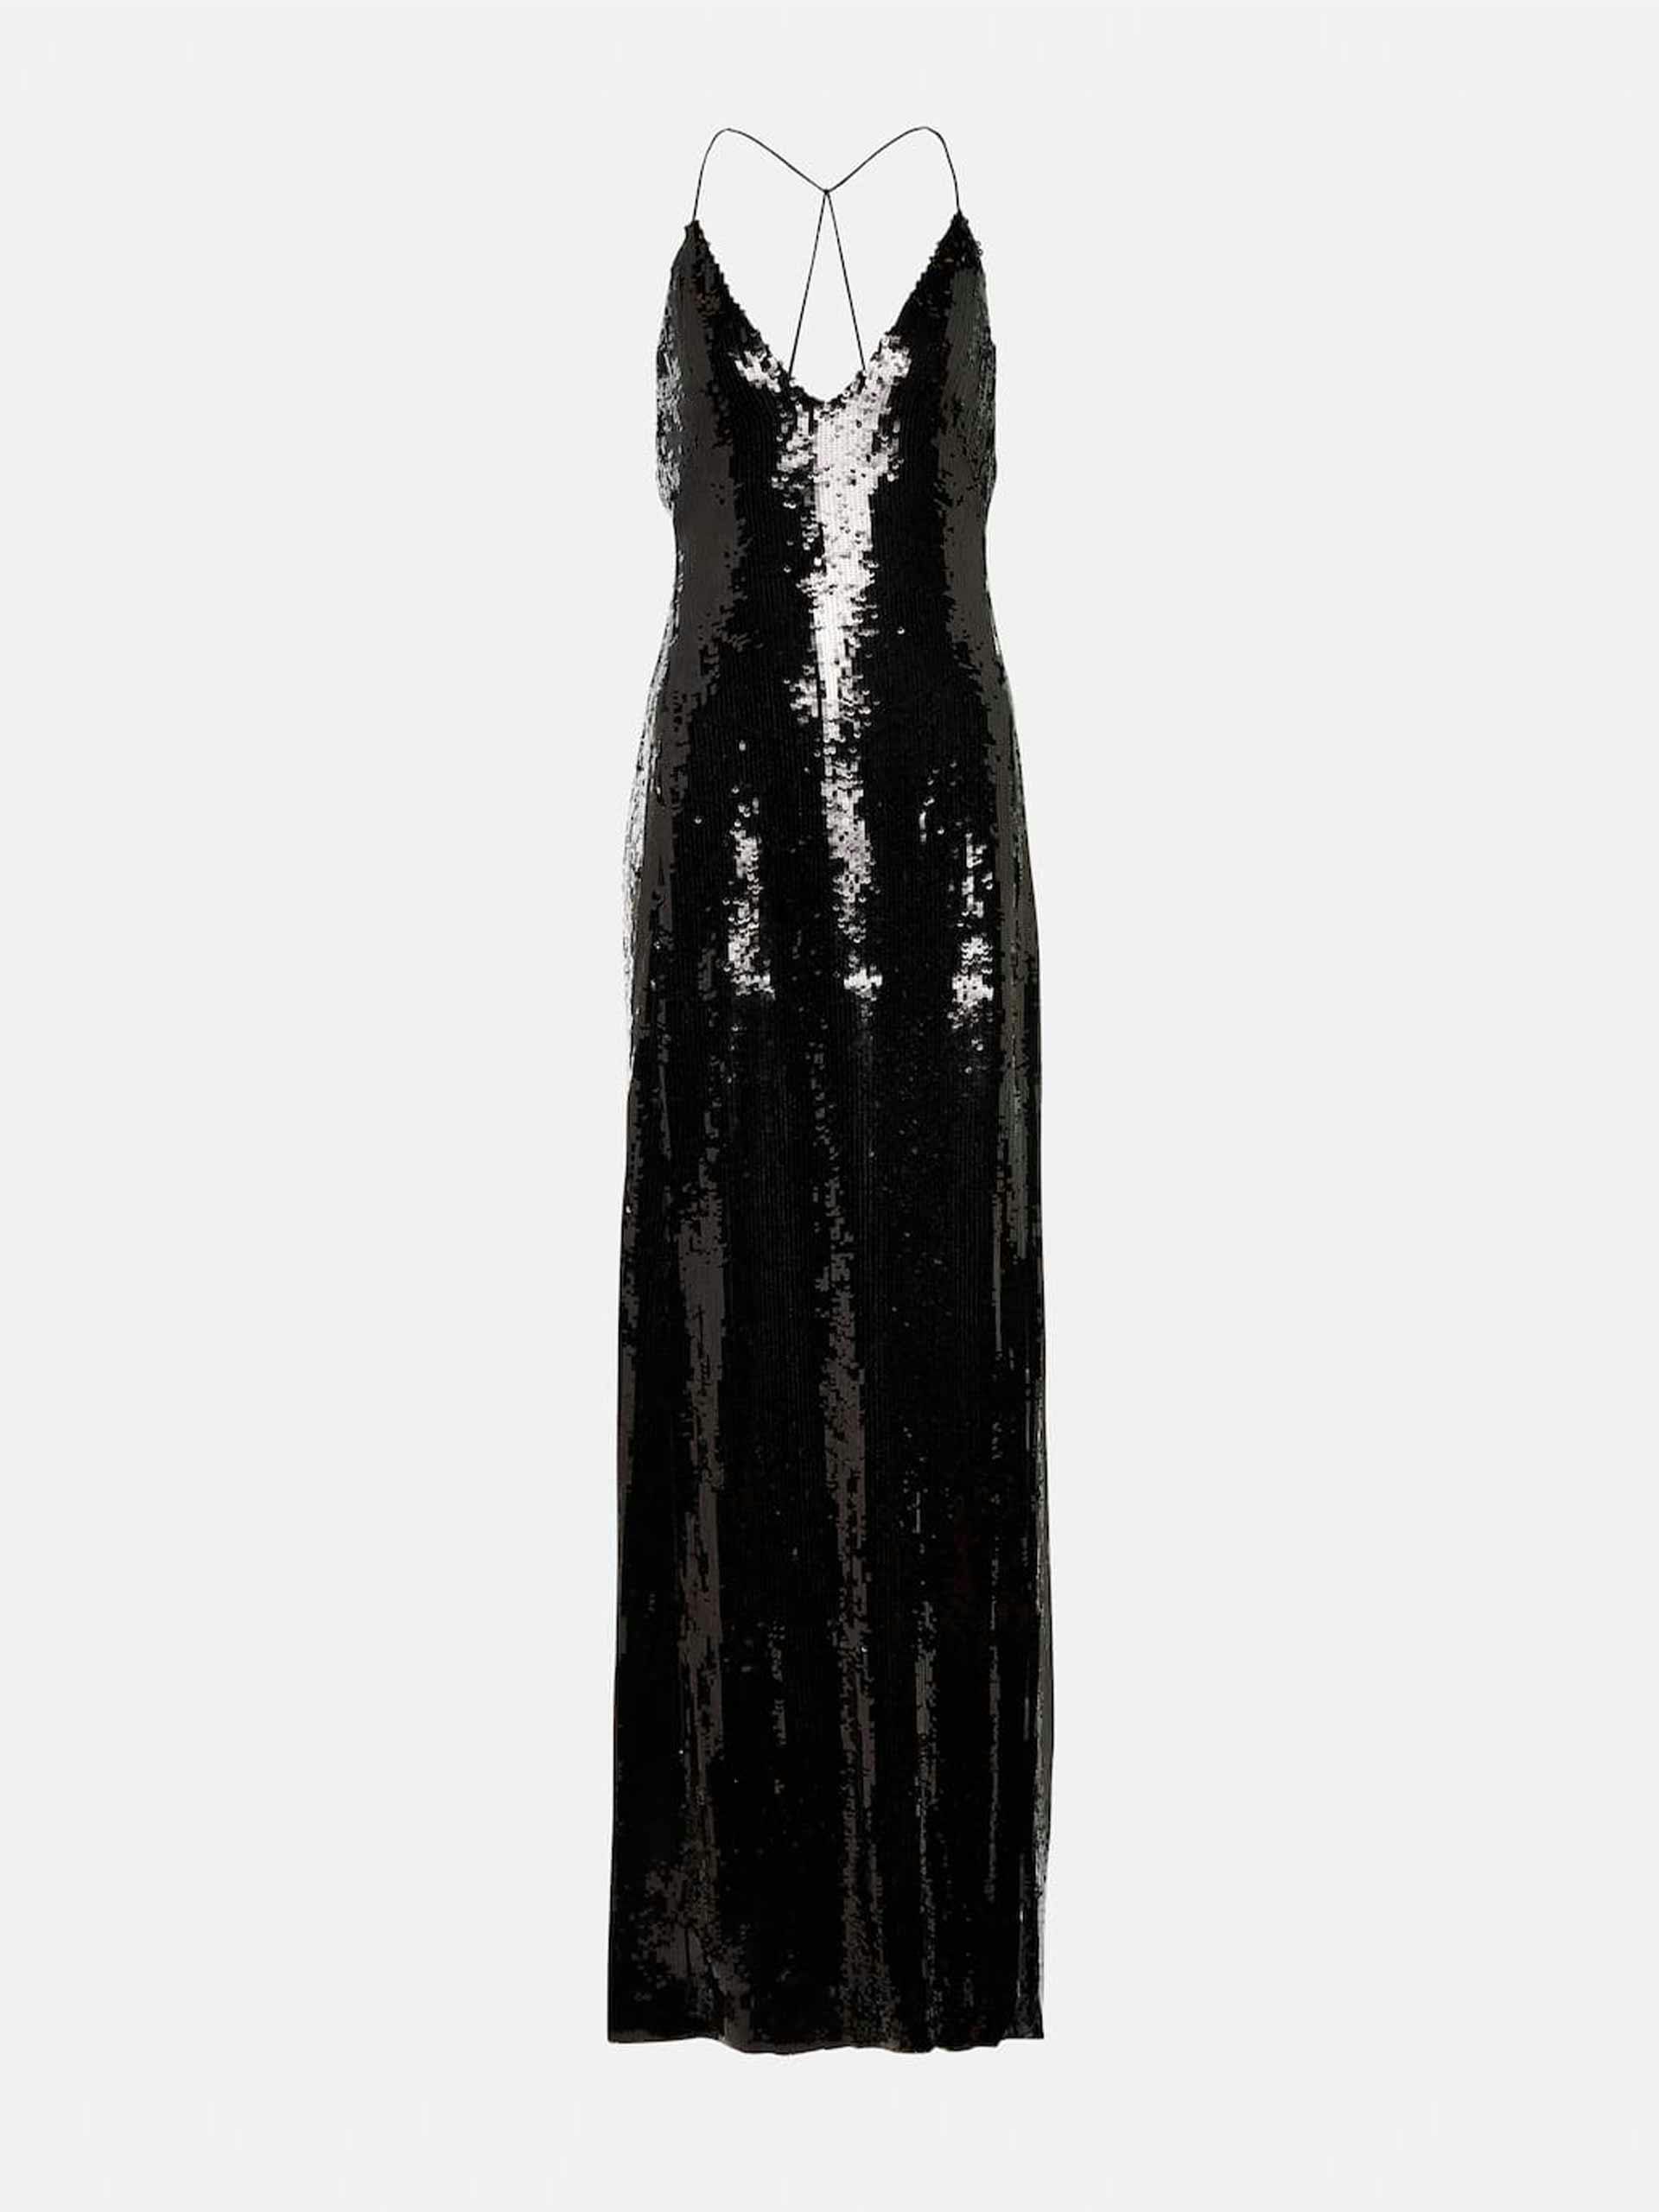 Black sequined gown